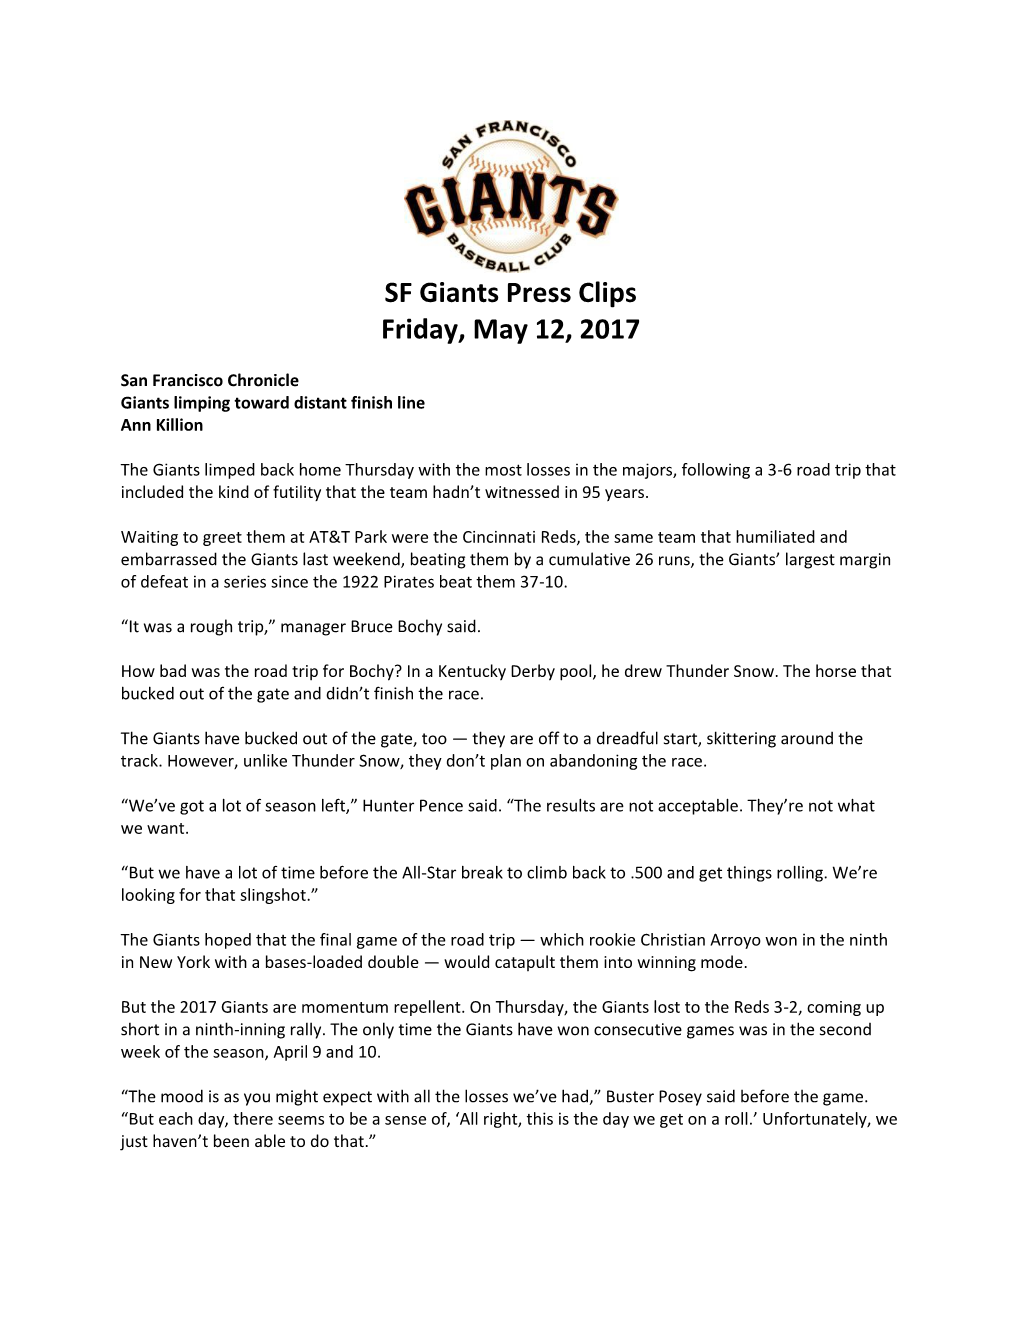 SF Giants Press Clips Friday, May 12, 2017